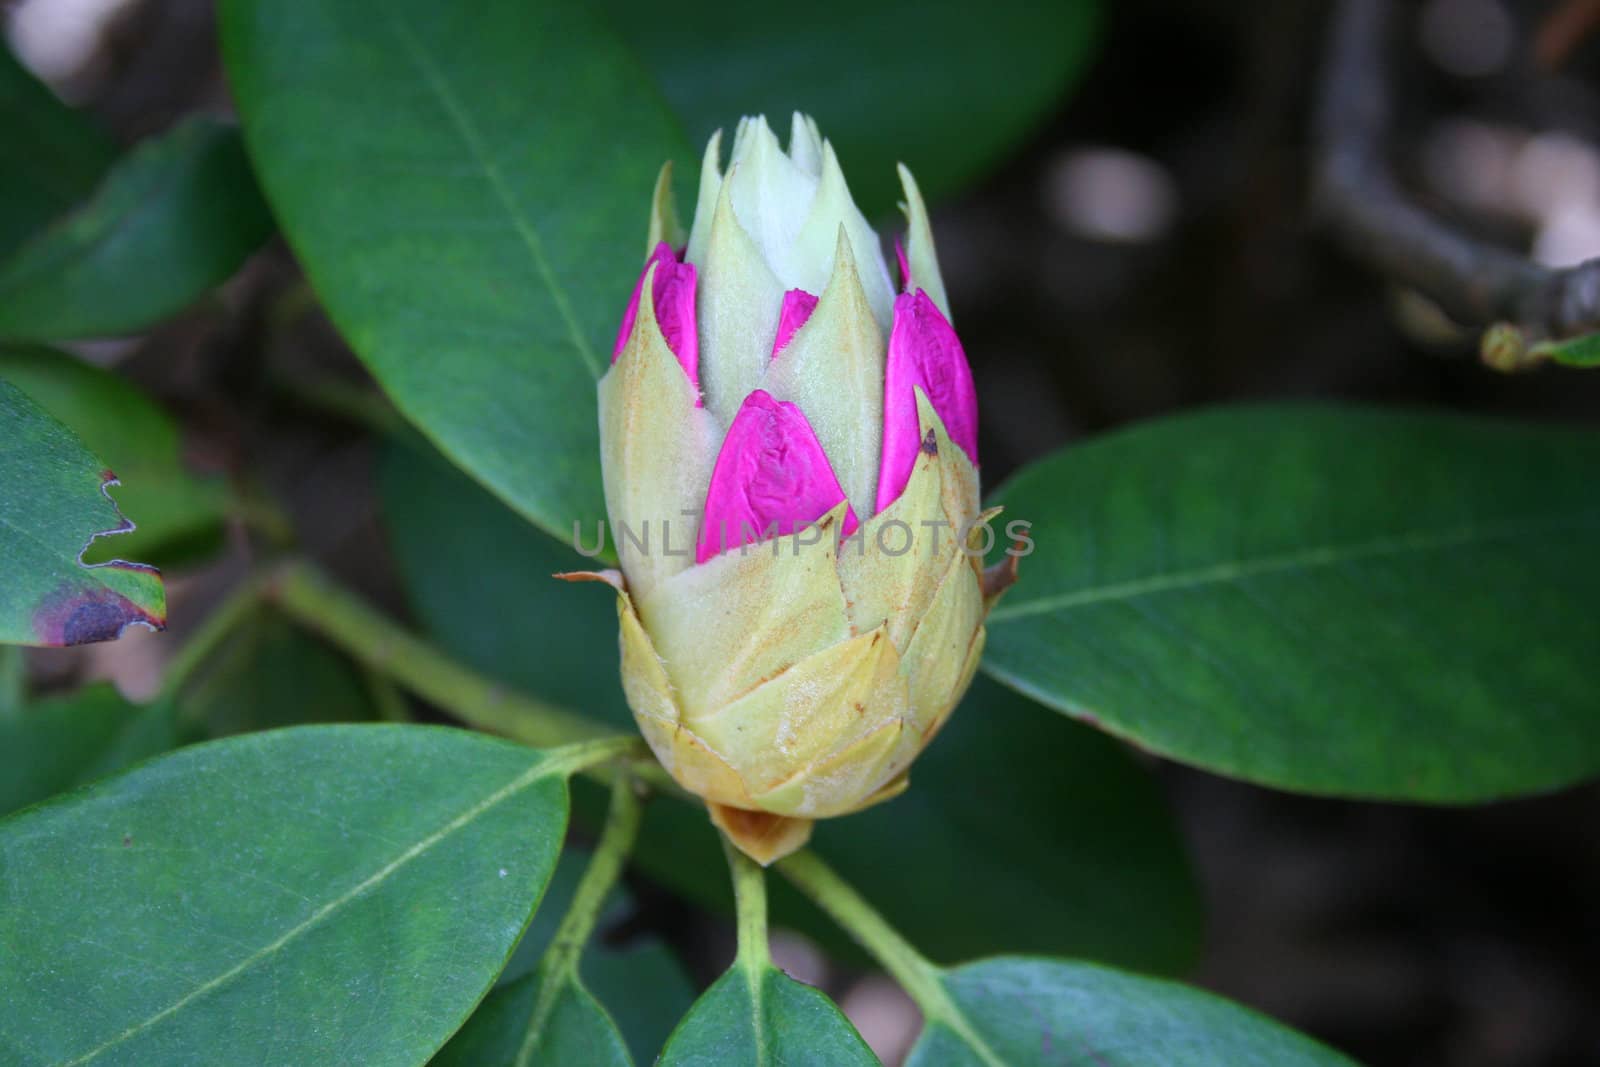 an image of a Rhododendron  Flower Bud